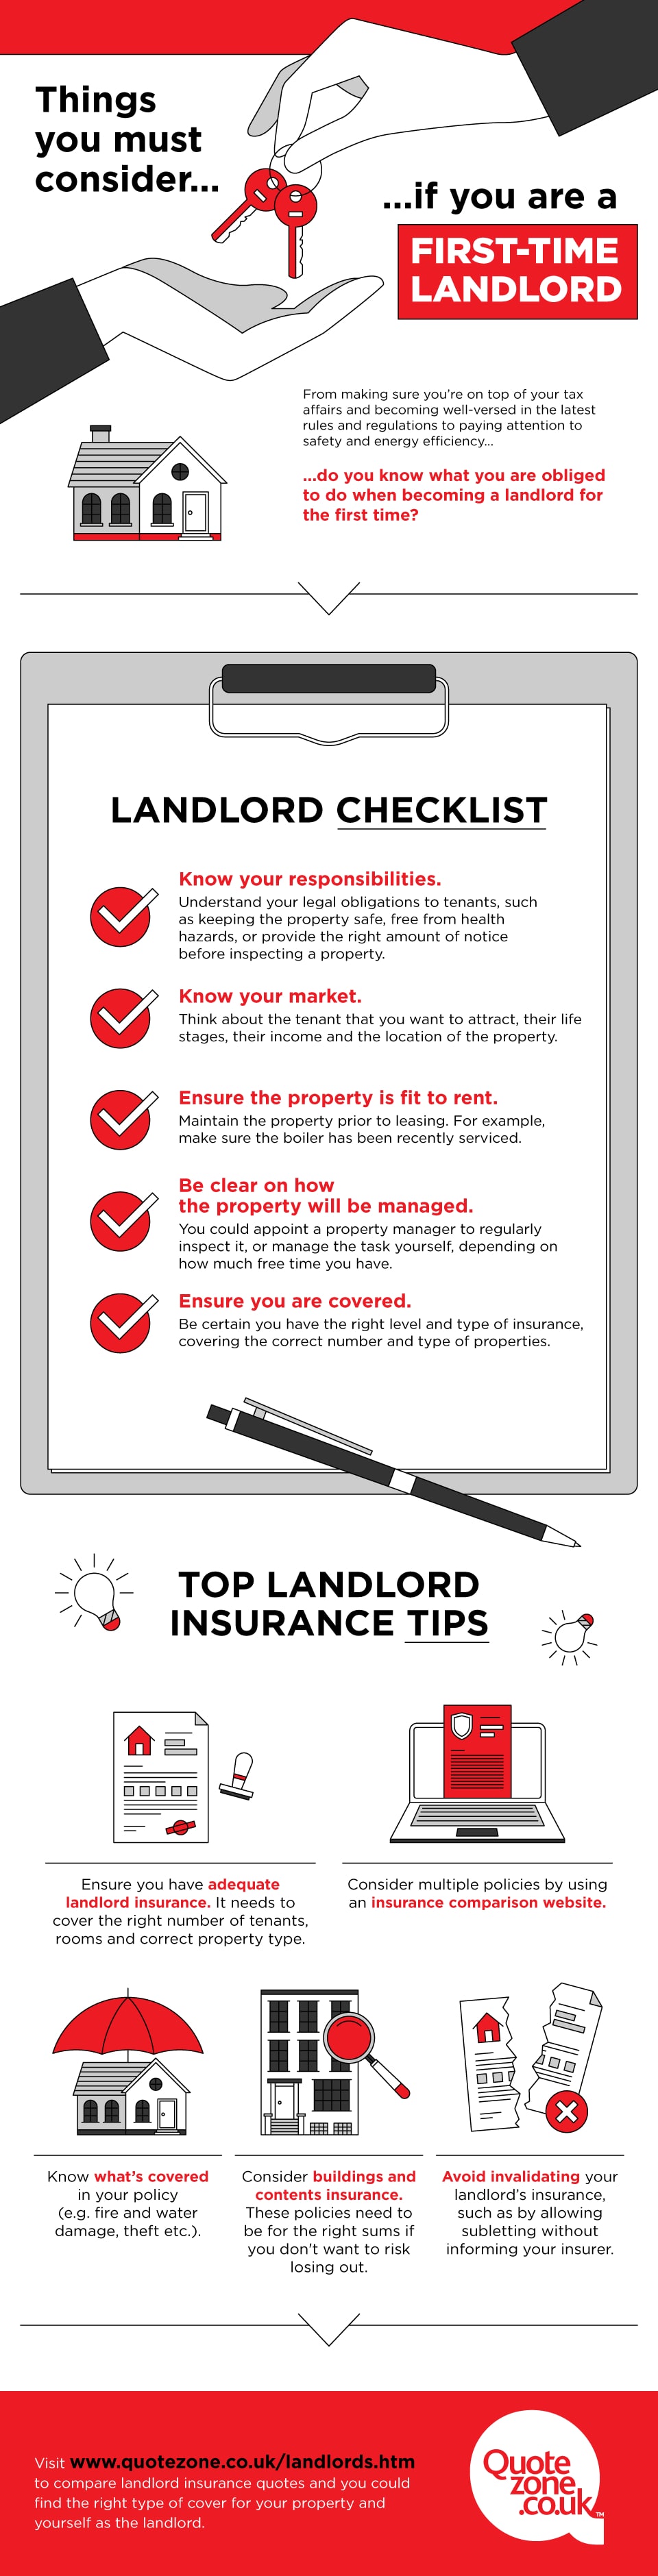 Quotezone landlords How to prepare a rental property in 2018